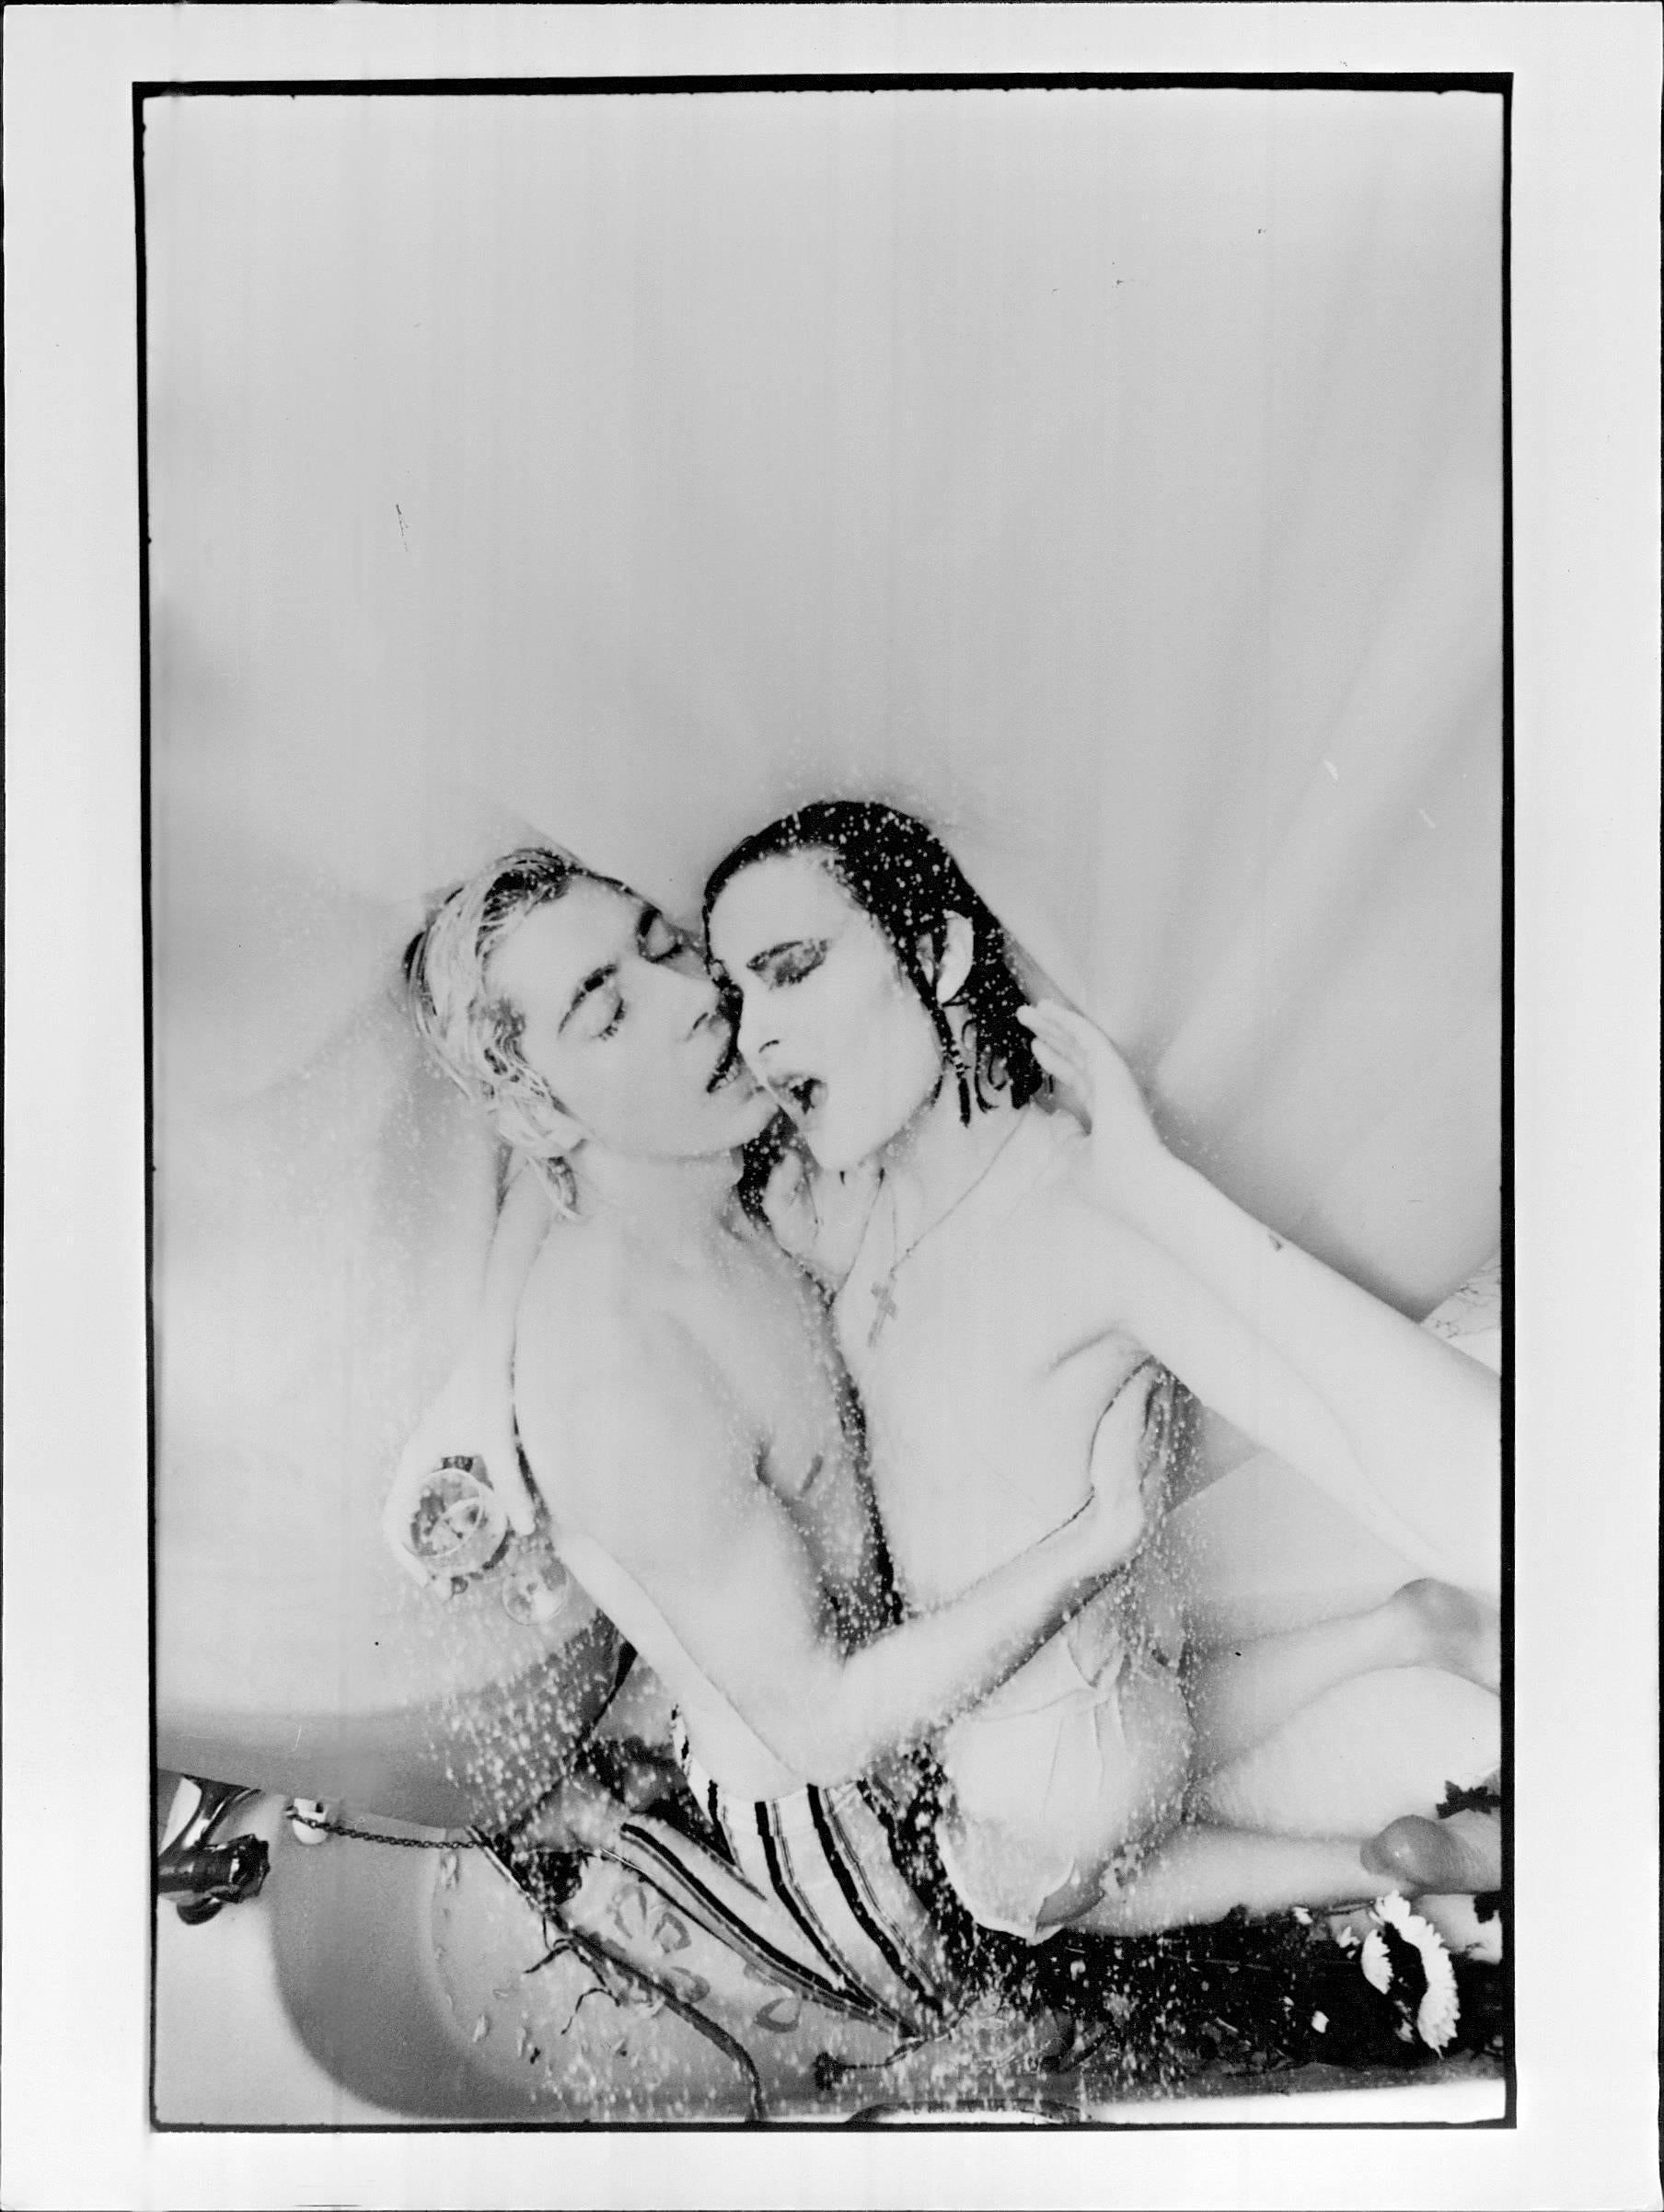 Ebet Roberts Portrait Photograph - Siouxsie Sioux and Budgie Sexy Vintage Original Photograph